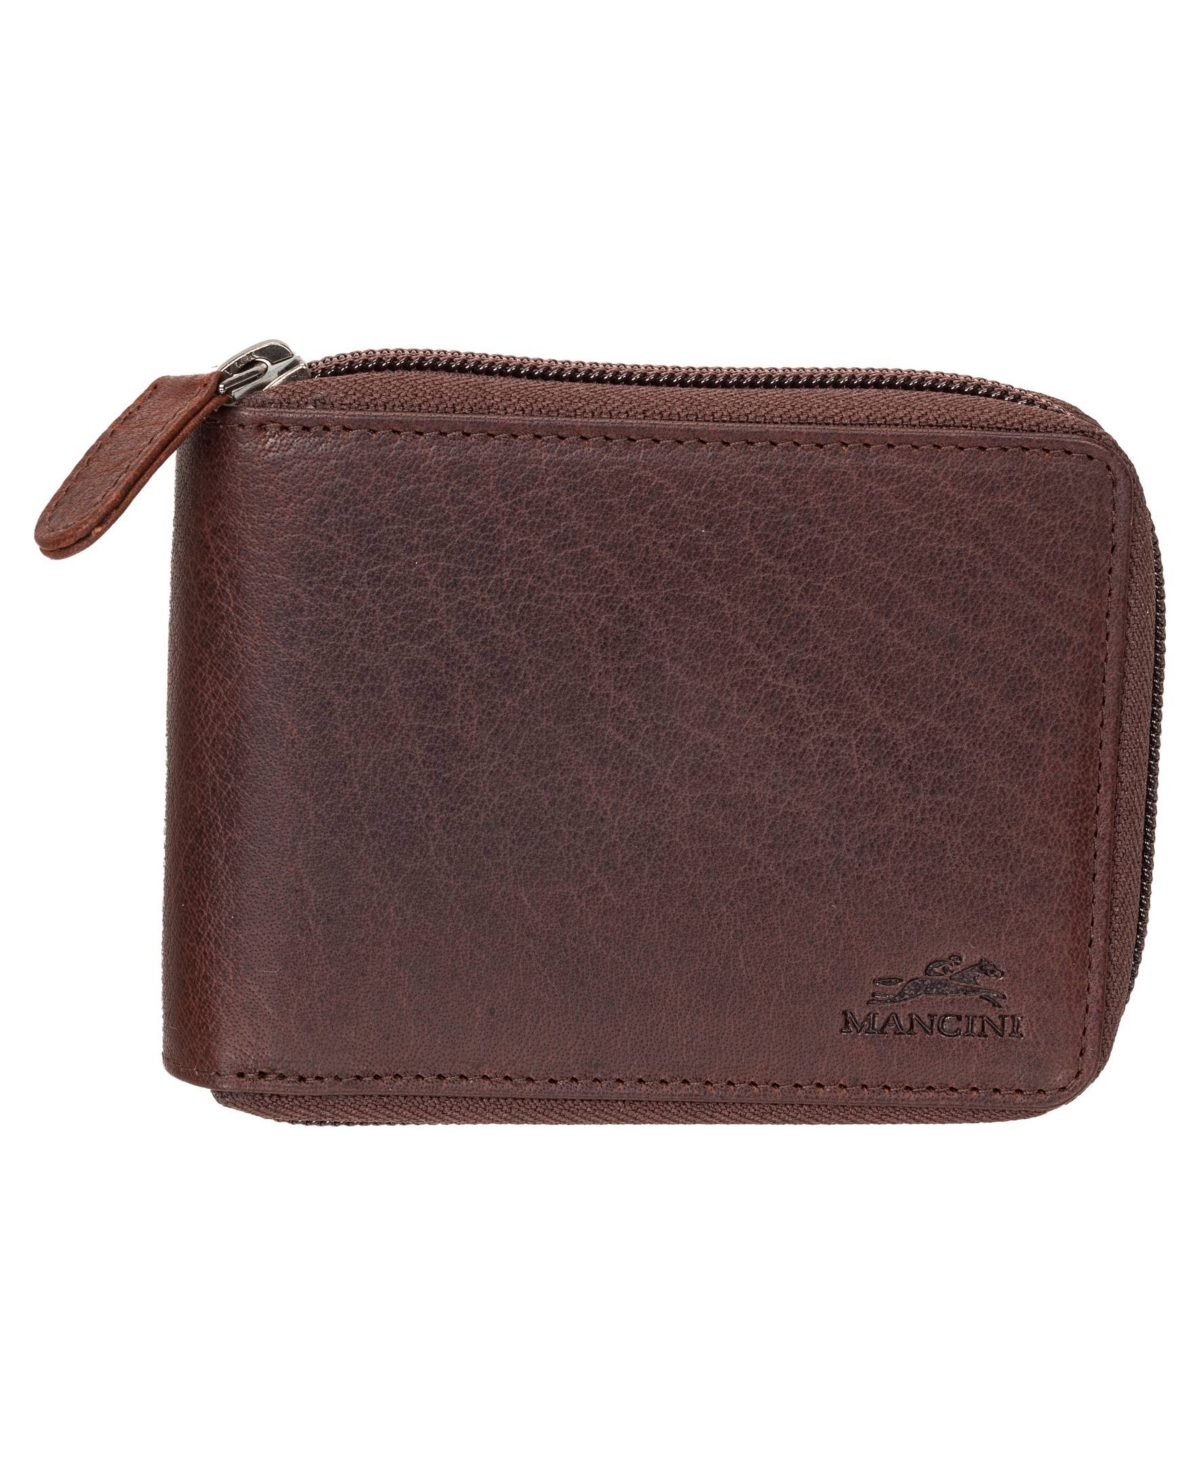 Mancini Men's Buffalo Rfid Secure Zippered Billfold Wallet With Removable Passcase In Brown